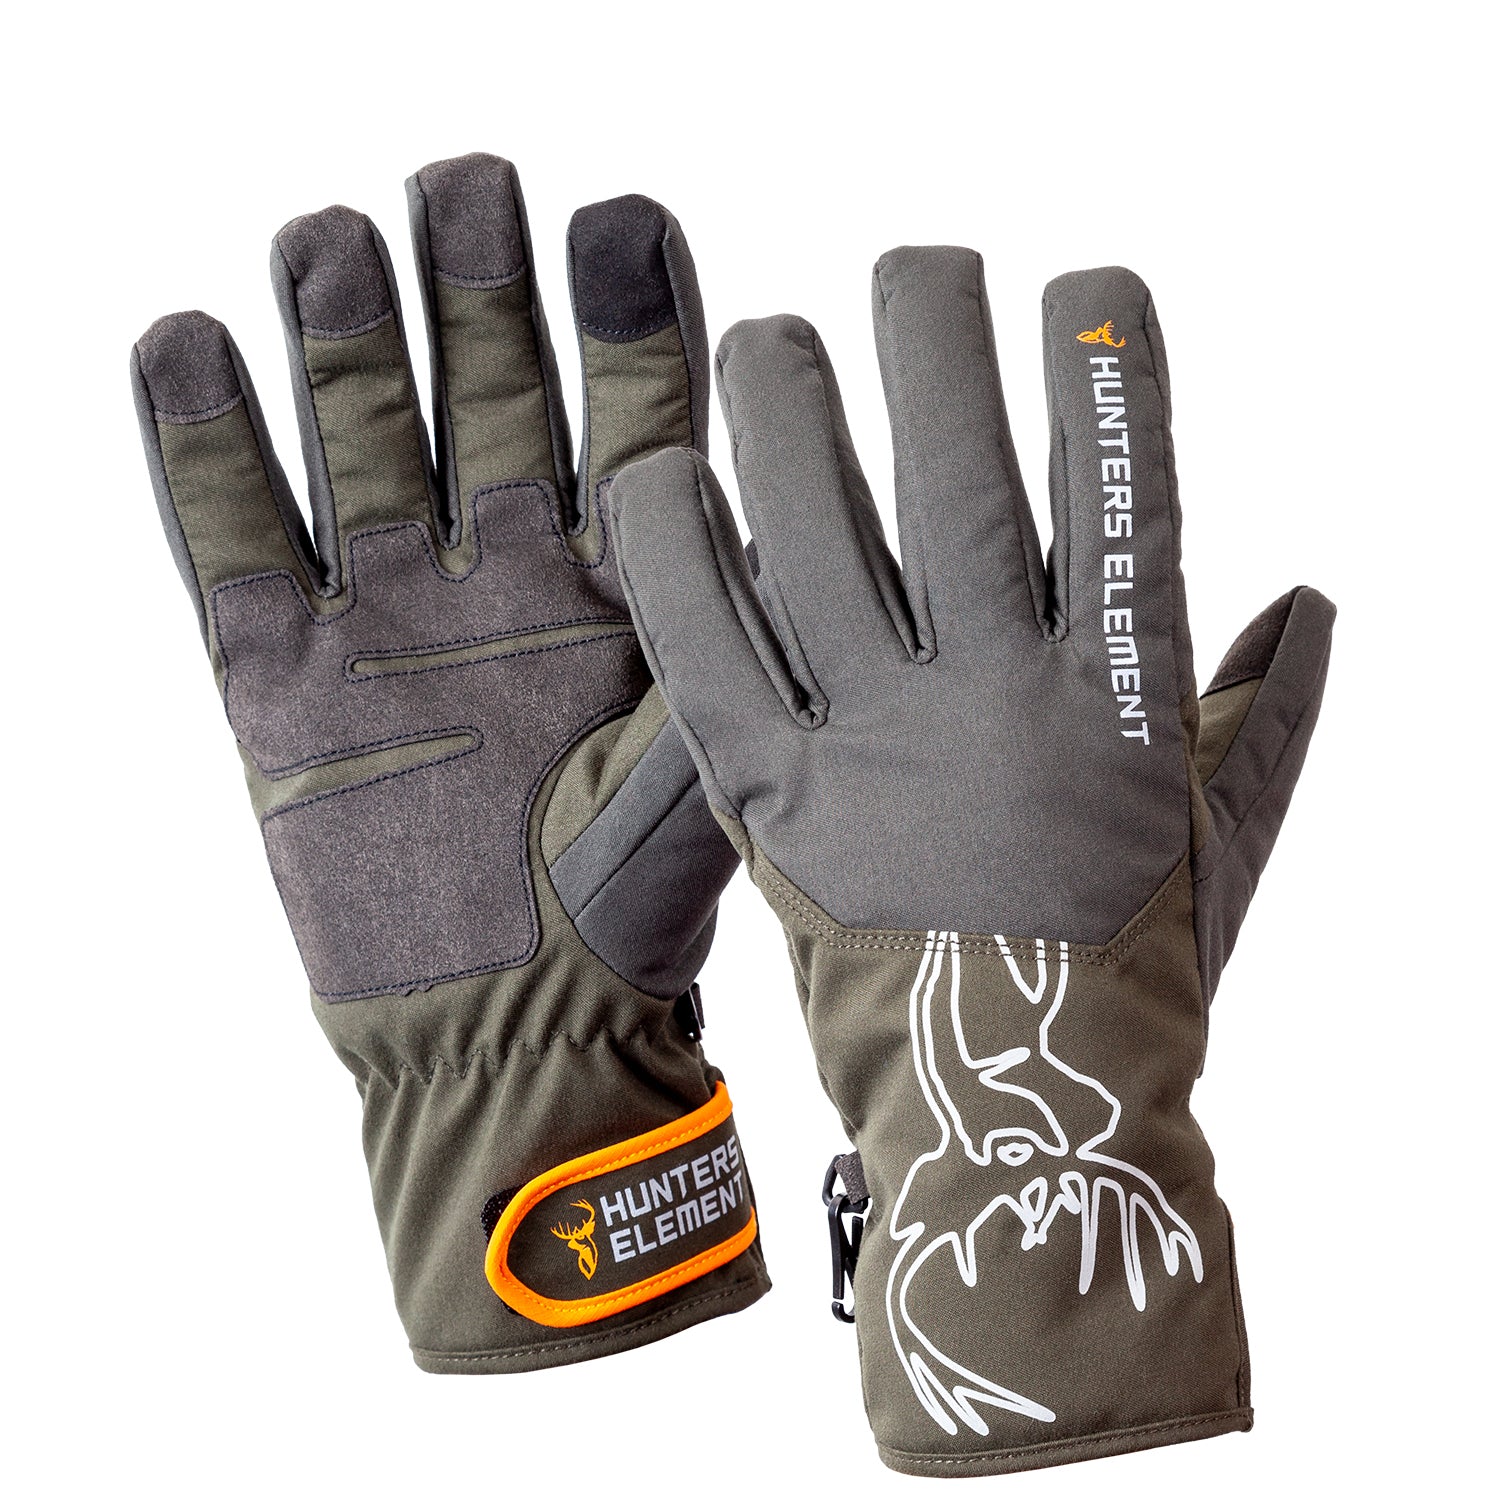 Blizzard Gloves, Thick Hunting Gloves